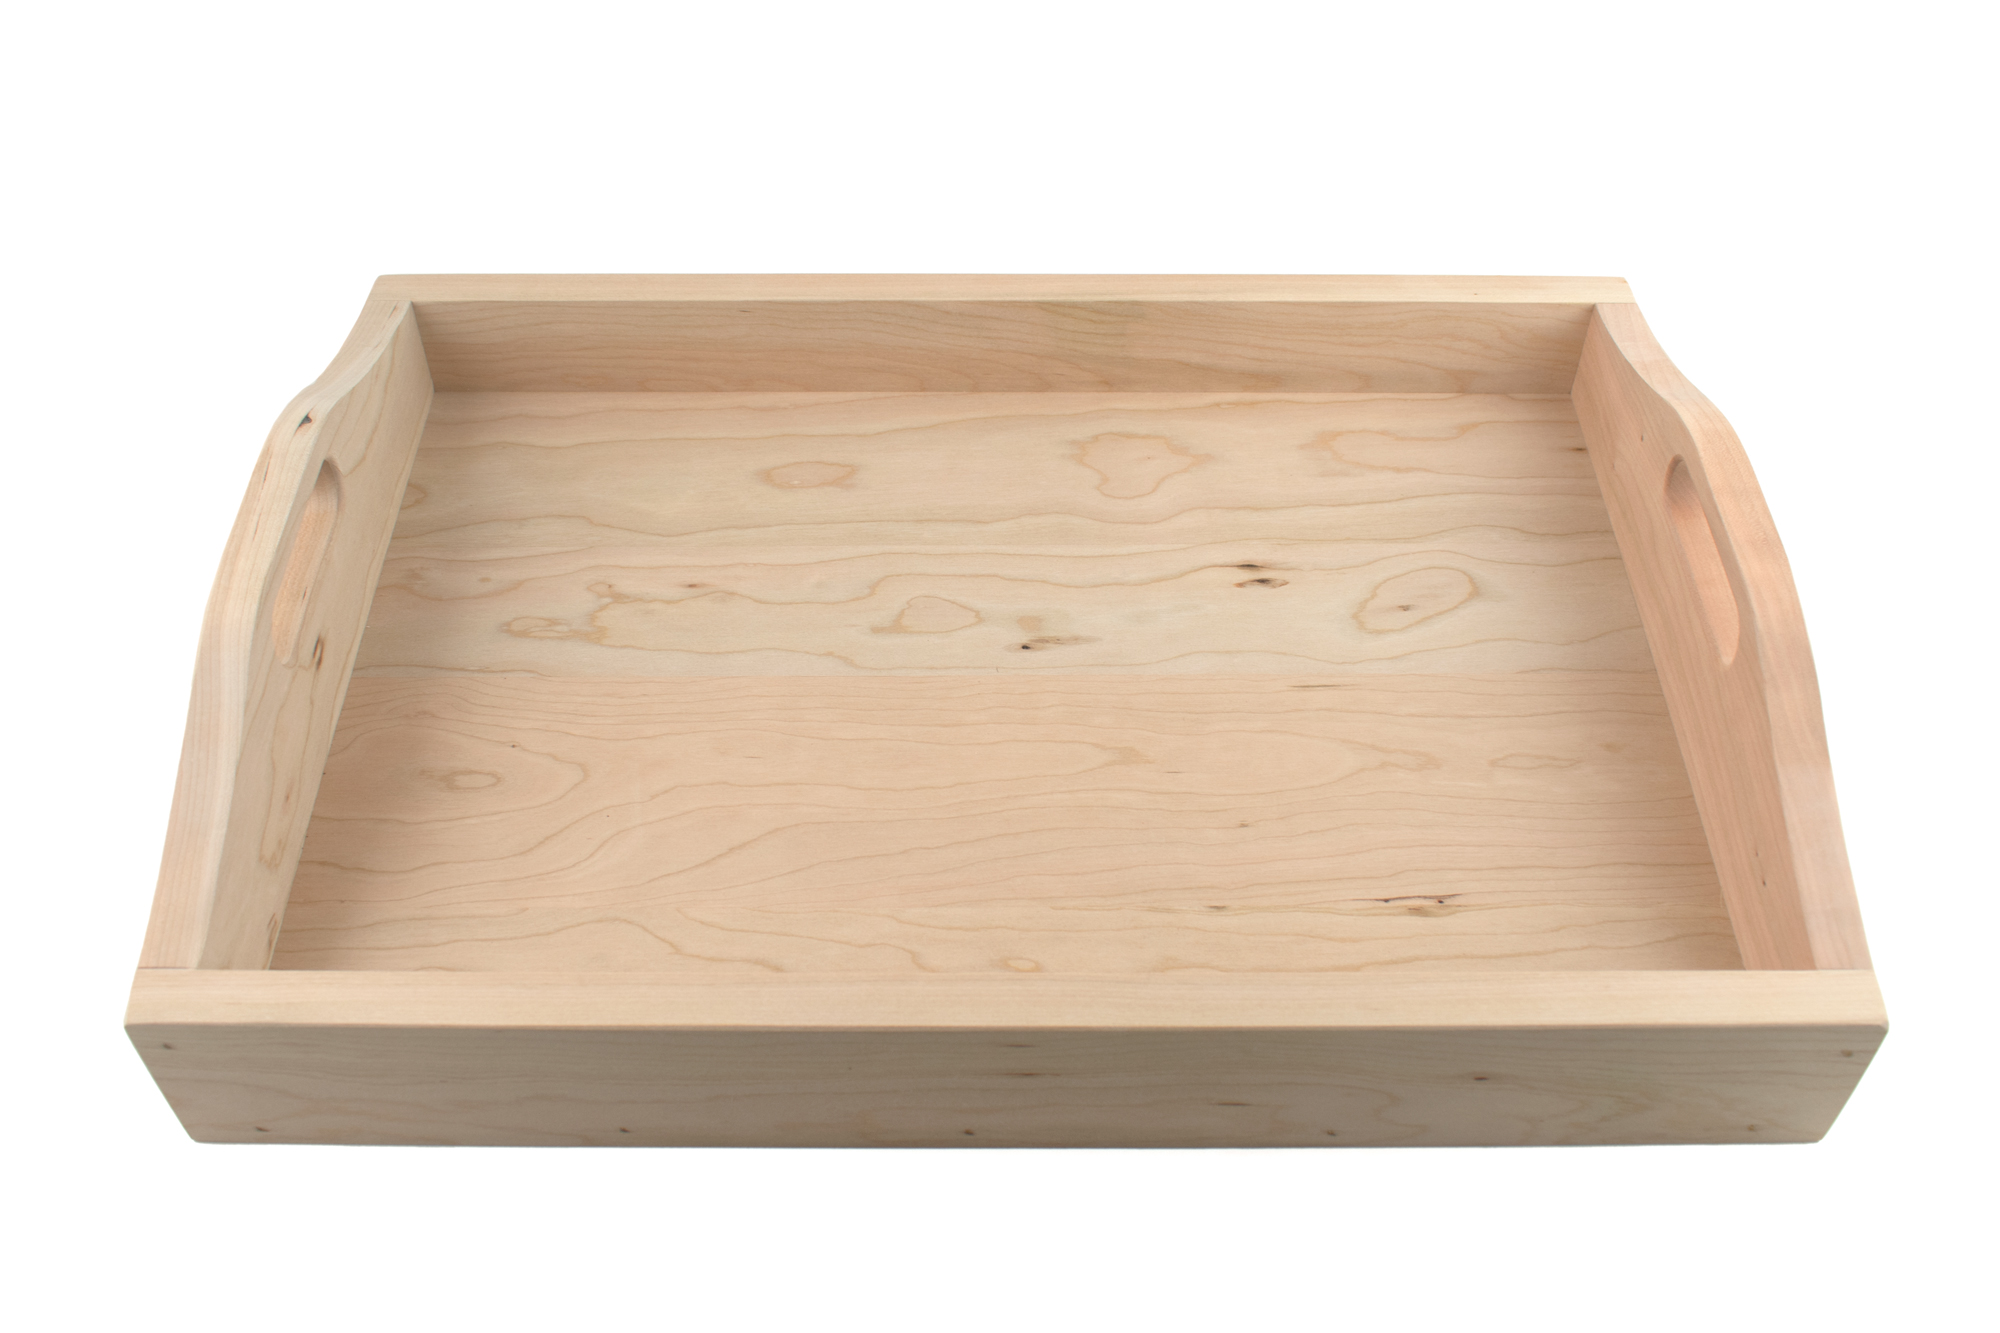 Large Cherry Hardwood Tray with Handles